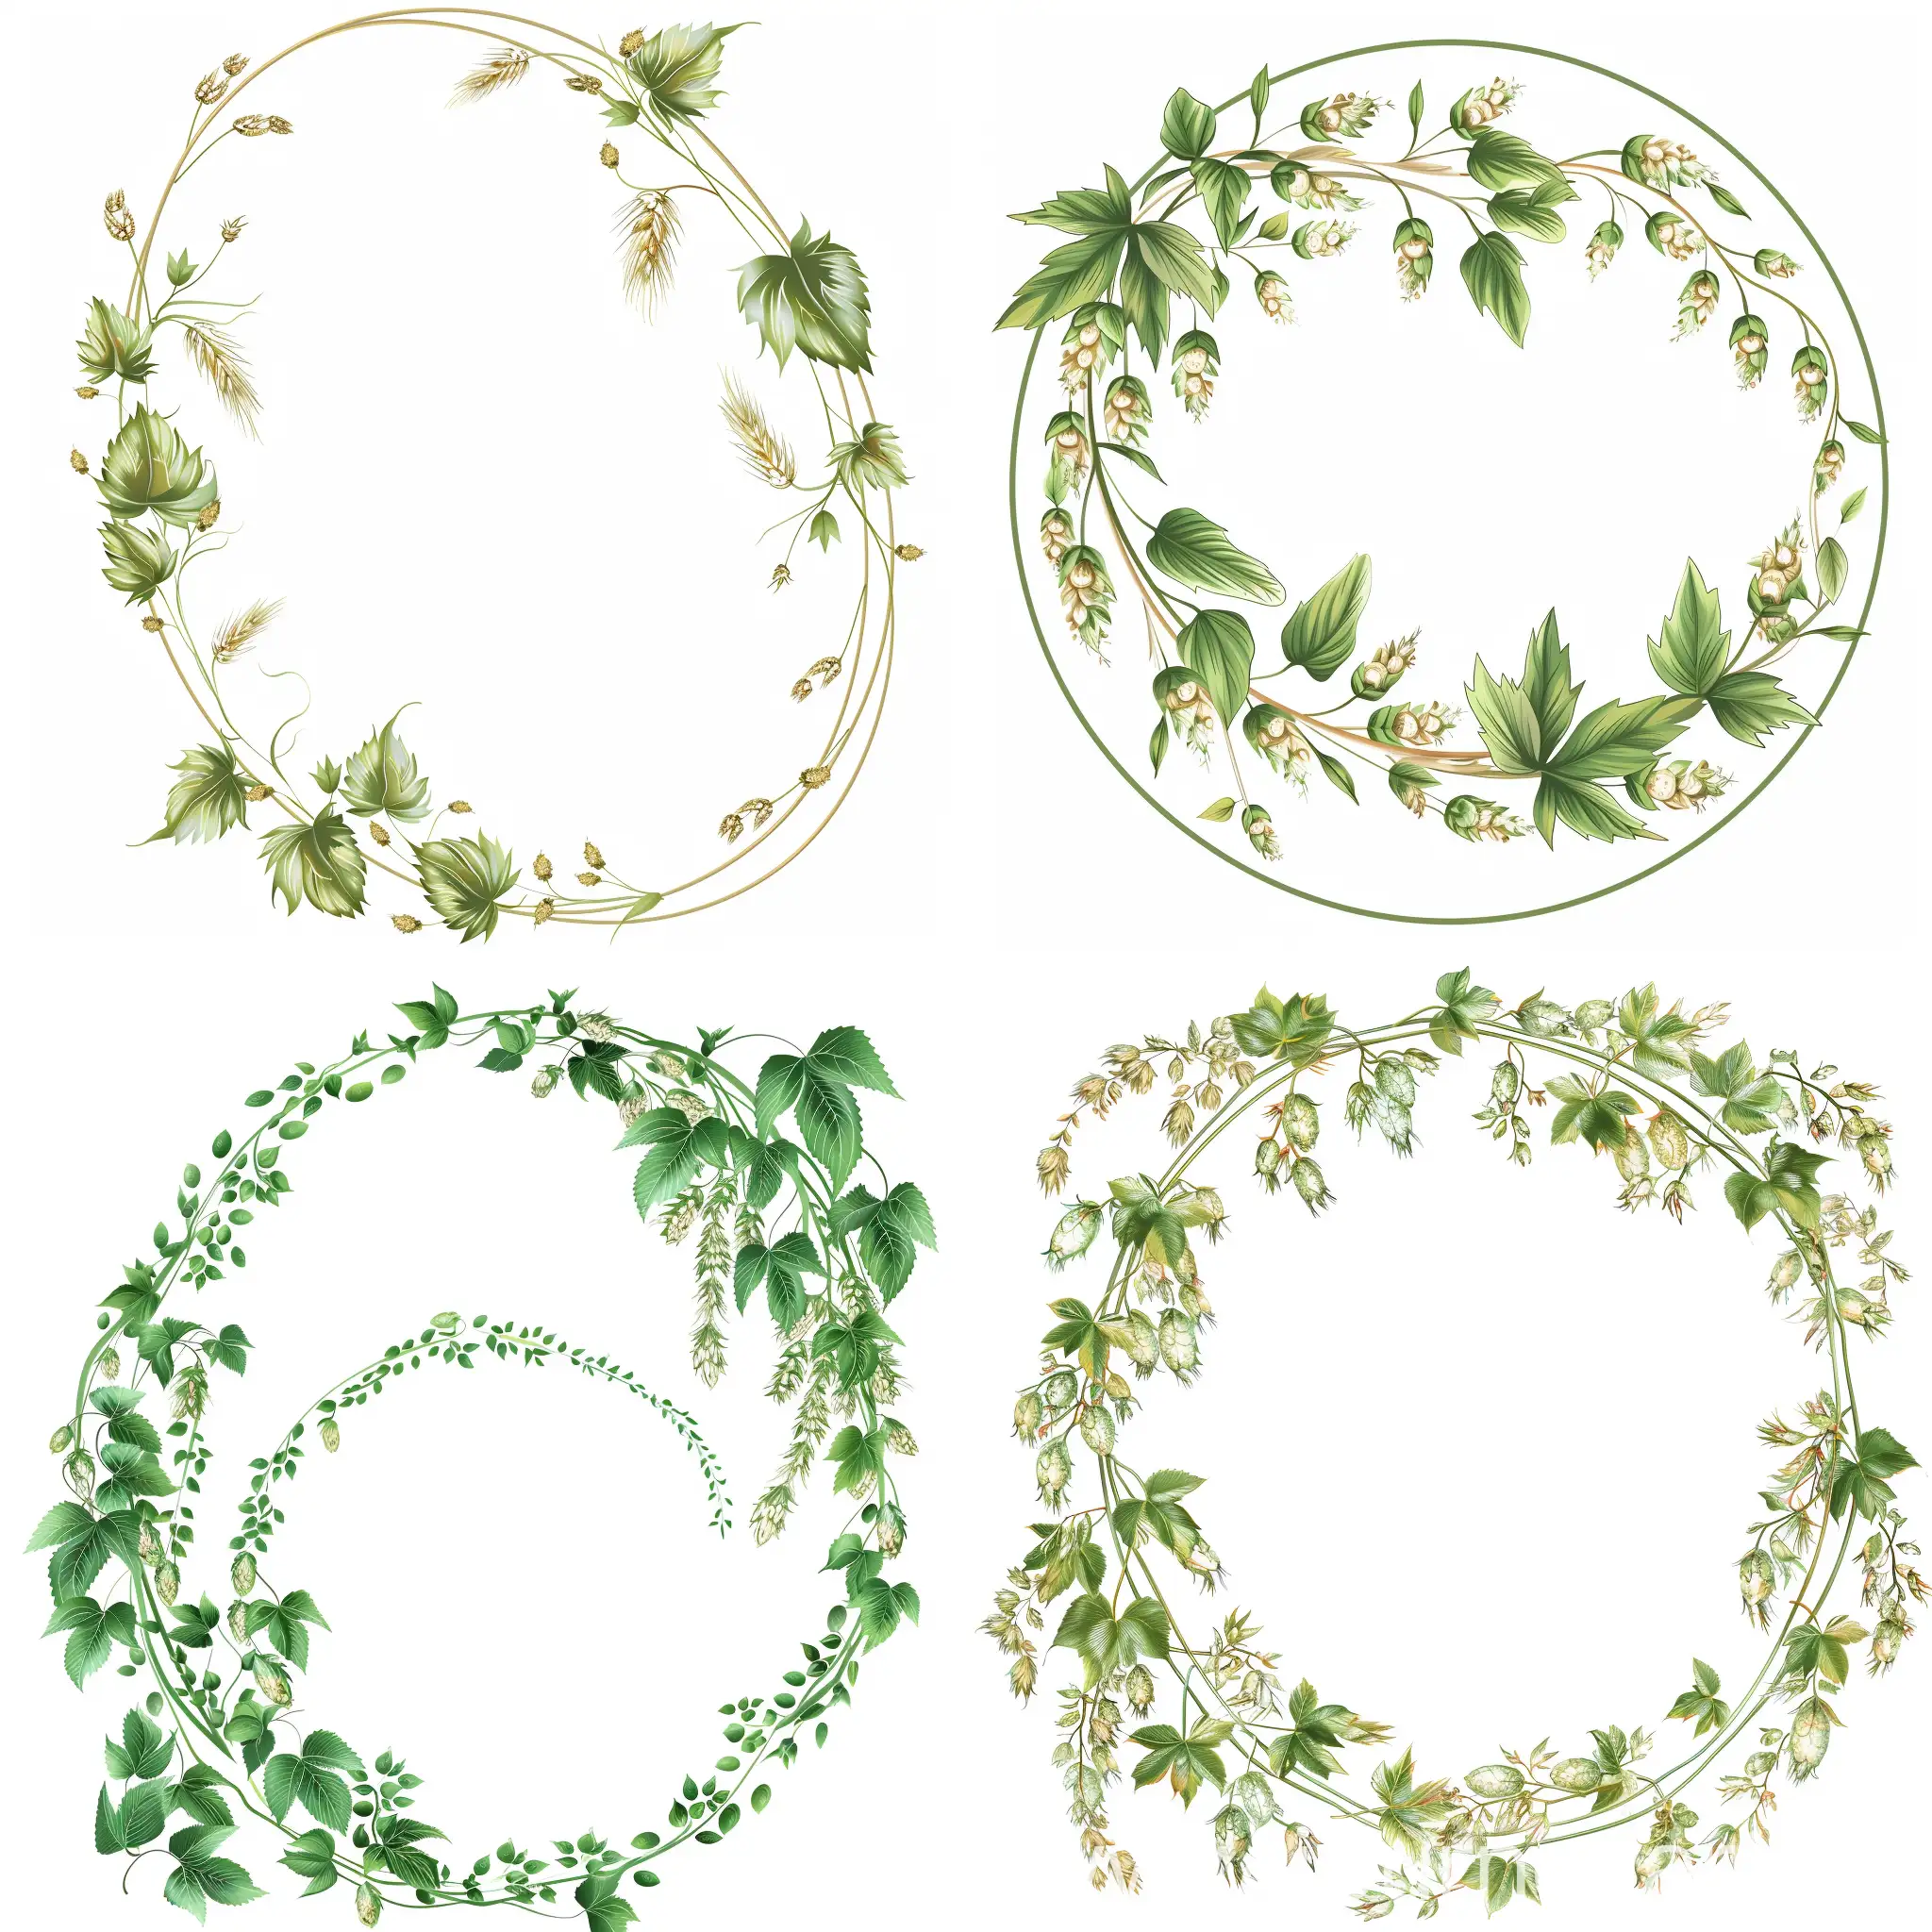 Delicate ornament along the contour of an oval made of translucent small hop leaves and barley spikelets, on a white background, flat illustration, vintage style, Victorian style